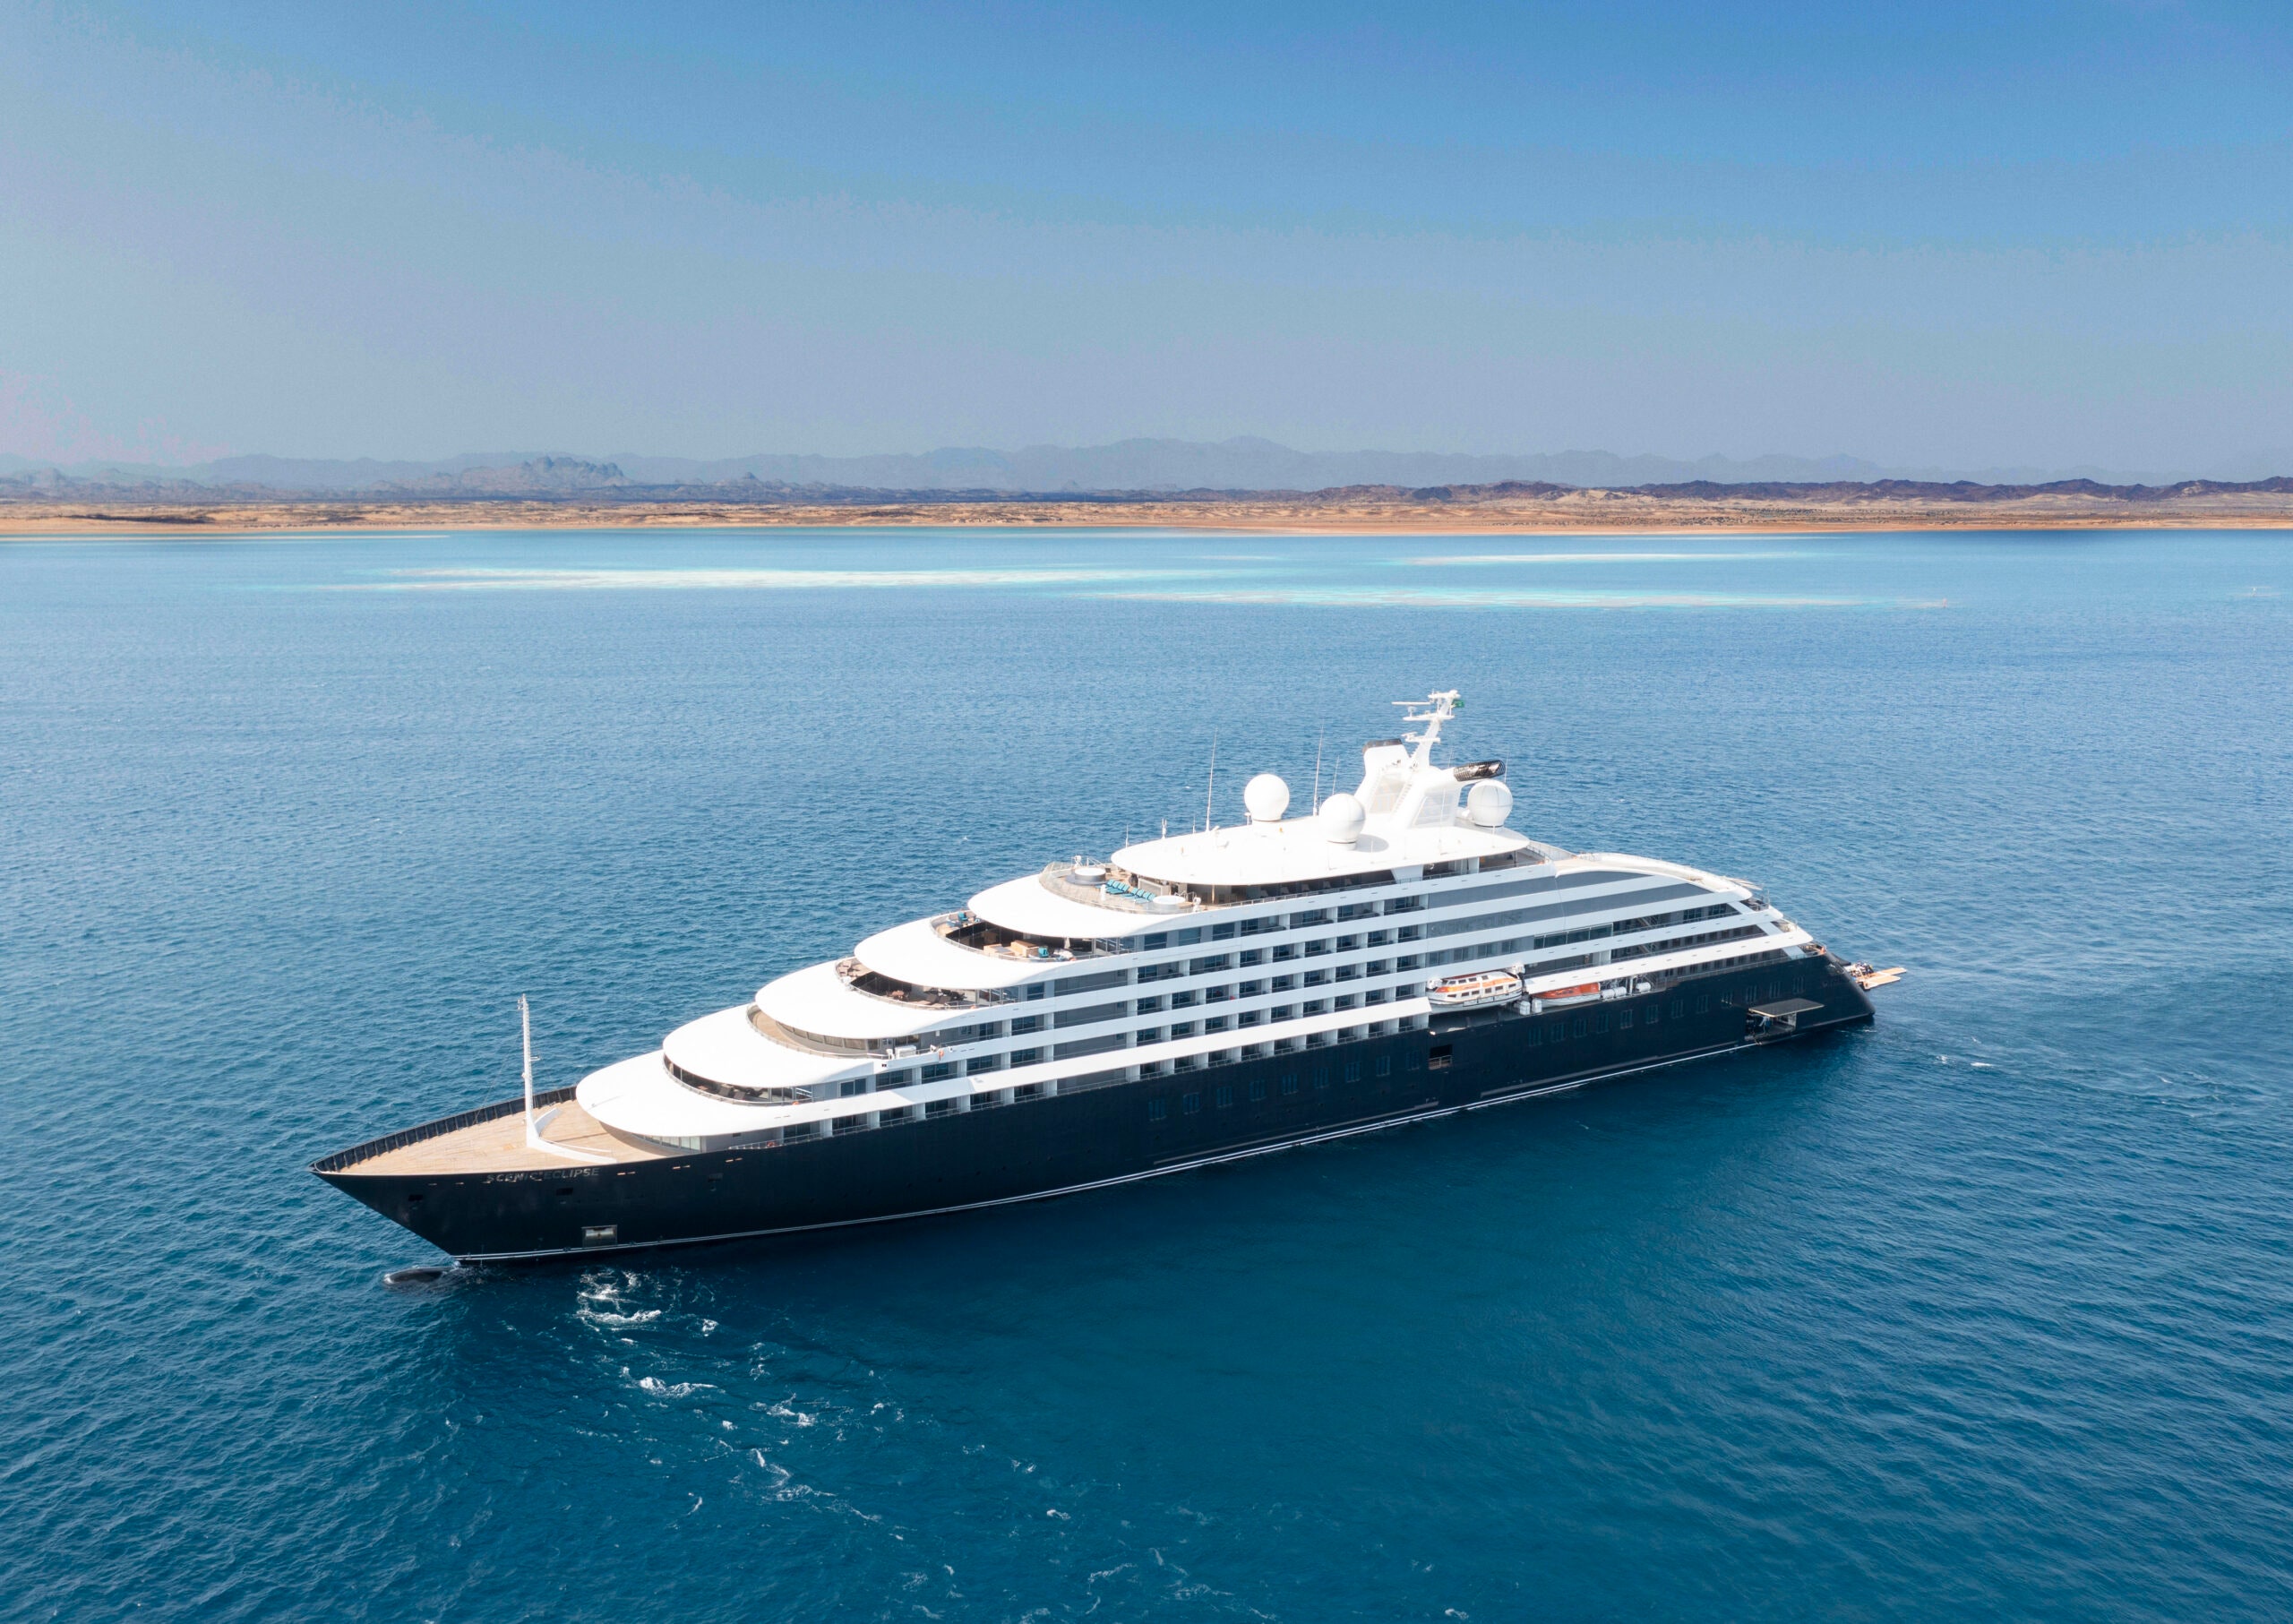 <p>Expanding from the rivers to the sea, Scenic launched its first ocean-going vessel, the expedition ship <em>Scenic Eclipse,</em> in 2019, and its second, <em>Scenic Eclipse II,</em> in 2023. Though each ship only carries 200 passengers in polar regions (and 228 elsewhere), they both have an extraordinary array of shipboard offerings, including 10 dining experiences, two helicopters, and a submersible each.</p> <div class="callout"><p><a href="https://cna.st/affiliate-link/2kPDMaDggM5J7VdjDfqLKeGcDLx3LeopgobWk6hcpbCTQucdUQkF9hsWWpG7cifs5skXSs11GXjQ2Ejay8mufsyoxUikc9MjsSRE3DBUitjRzpLM1eEhPo3qJi" rel="sponsored" title="Book now with Scenic Luxury Cruises & Tours">Book now with Scenic Luxury Cruises & Tours</a></p> </div><p>Sign up to receive the latest news, expert tips, and inspiration on all things travel</p><a href="https://www.cntraveler.com/newsletter/the-daily?sourceCode=msnsend">Inspire Me</a>